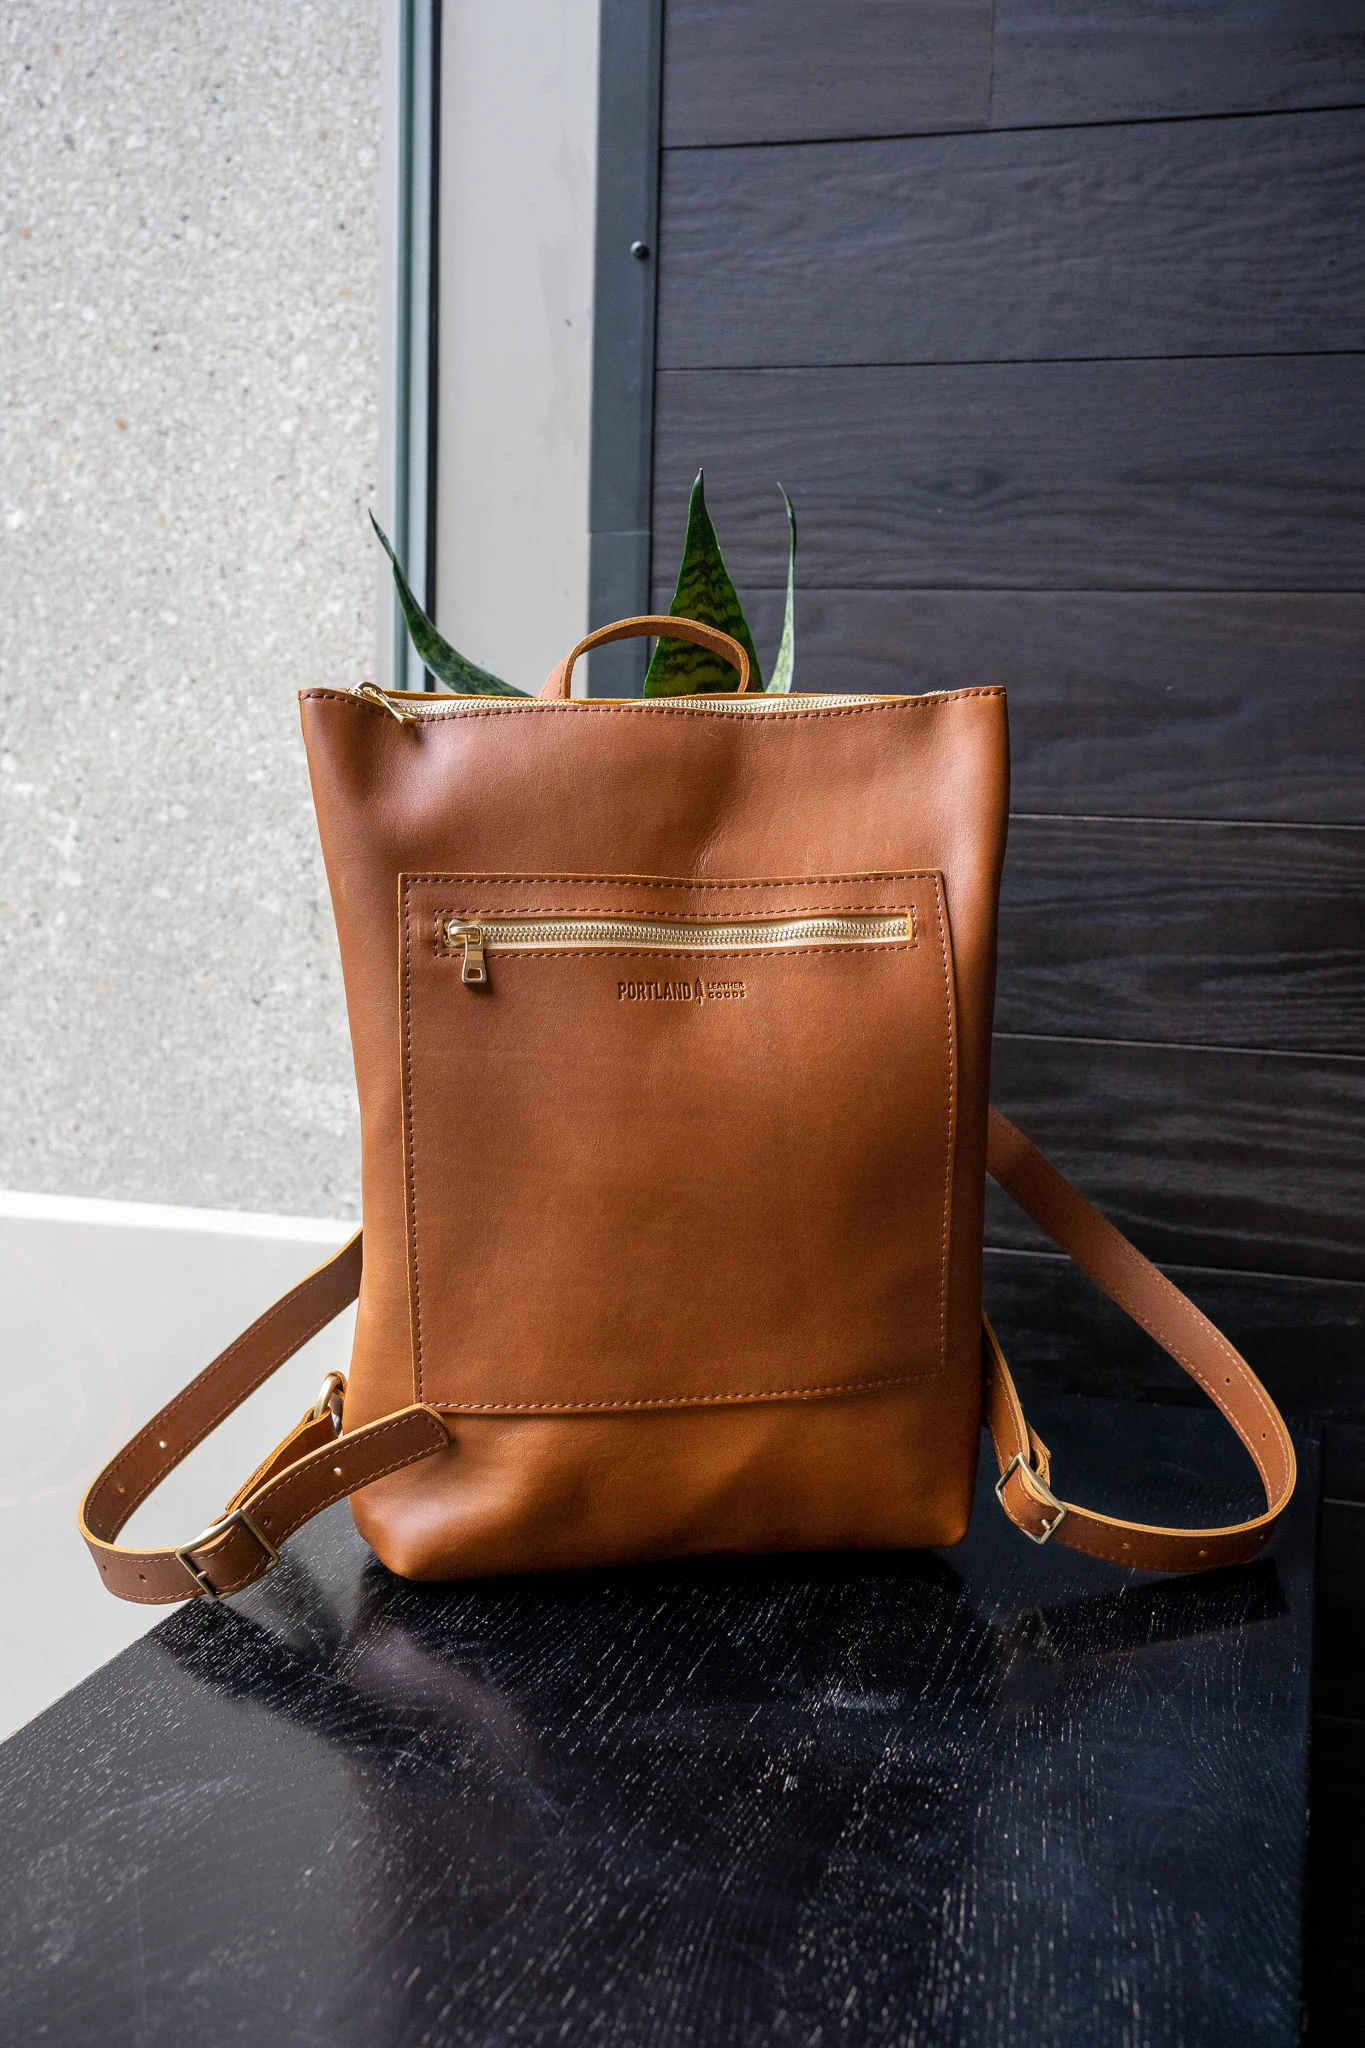 Portland Leather Goods Laptop Backpack Review